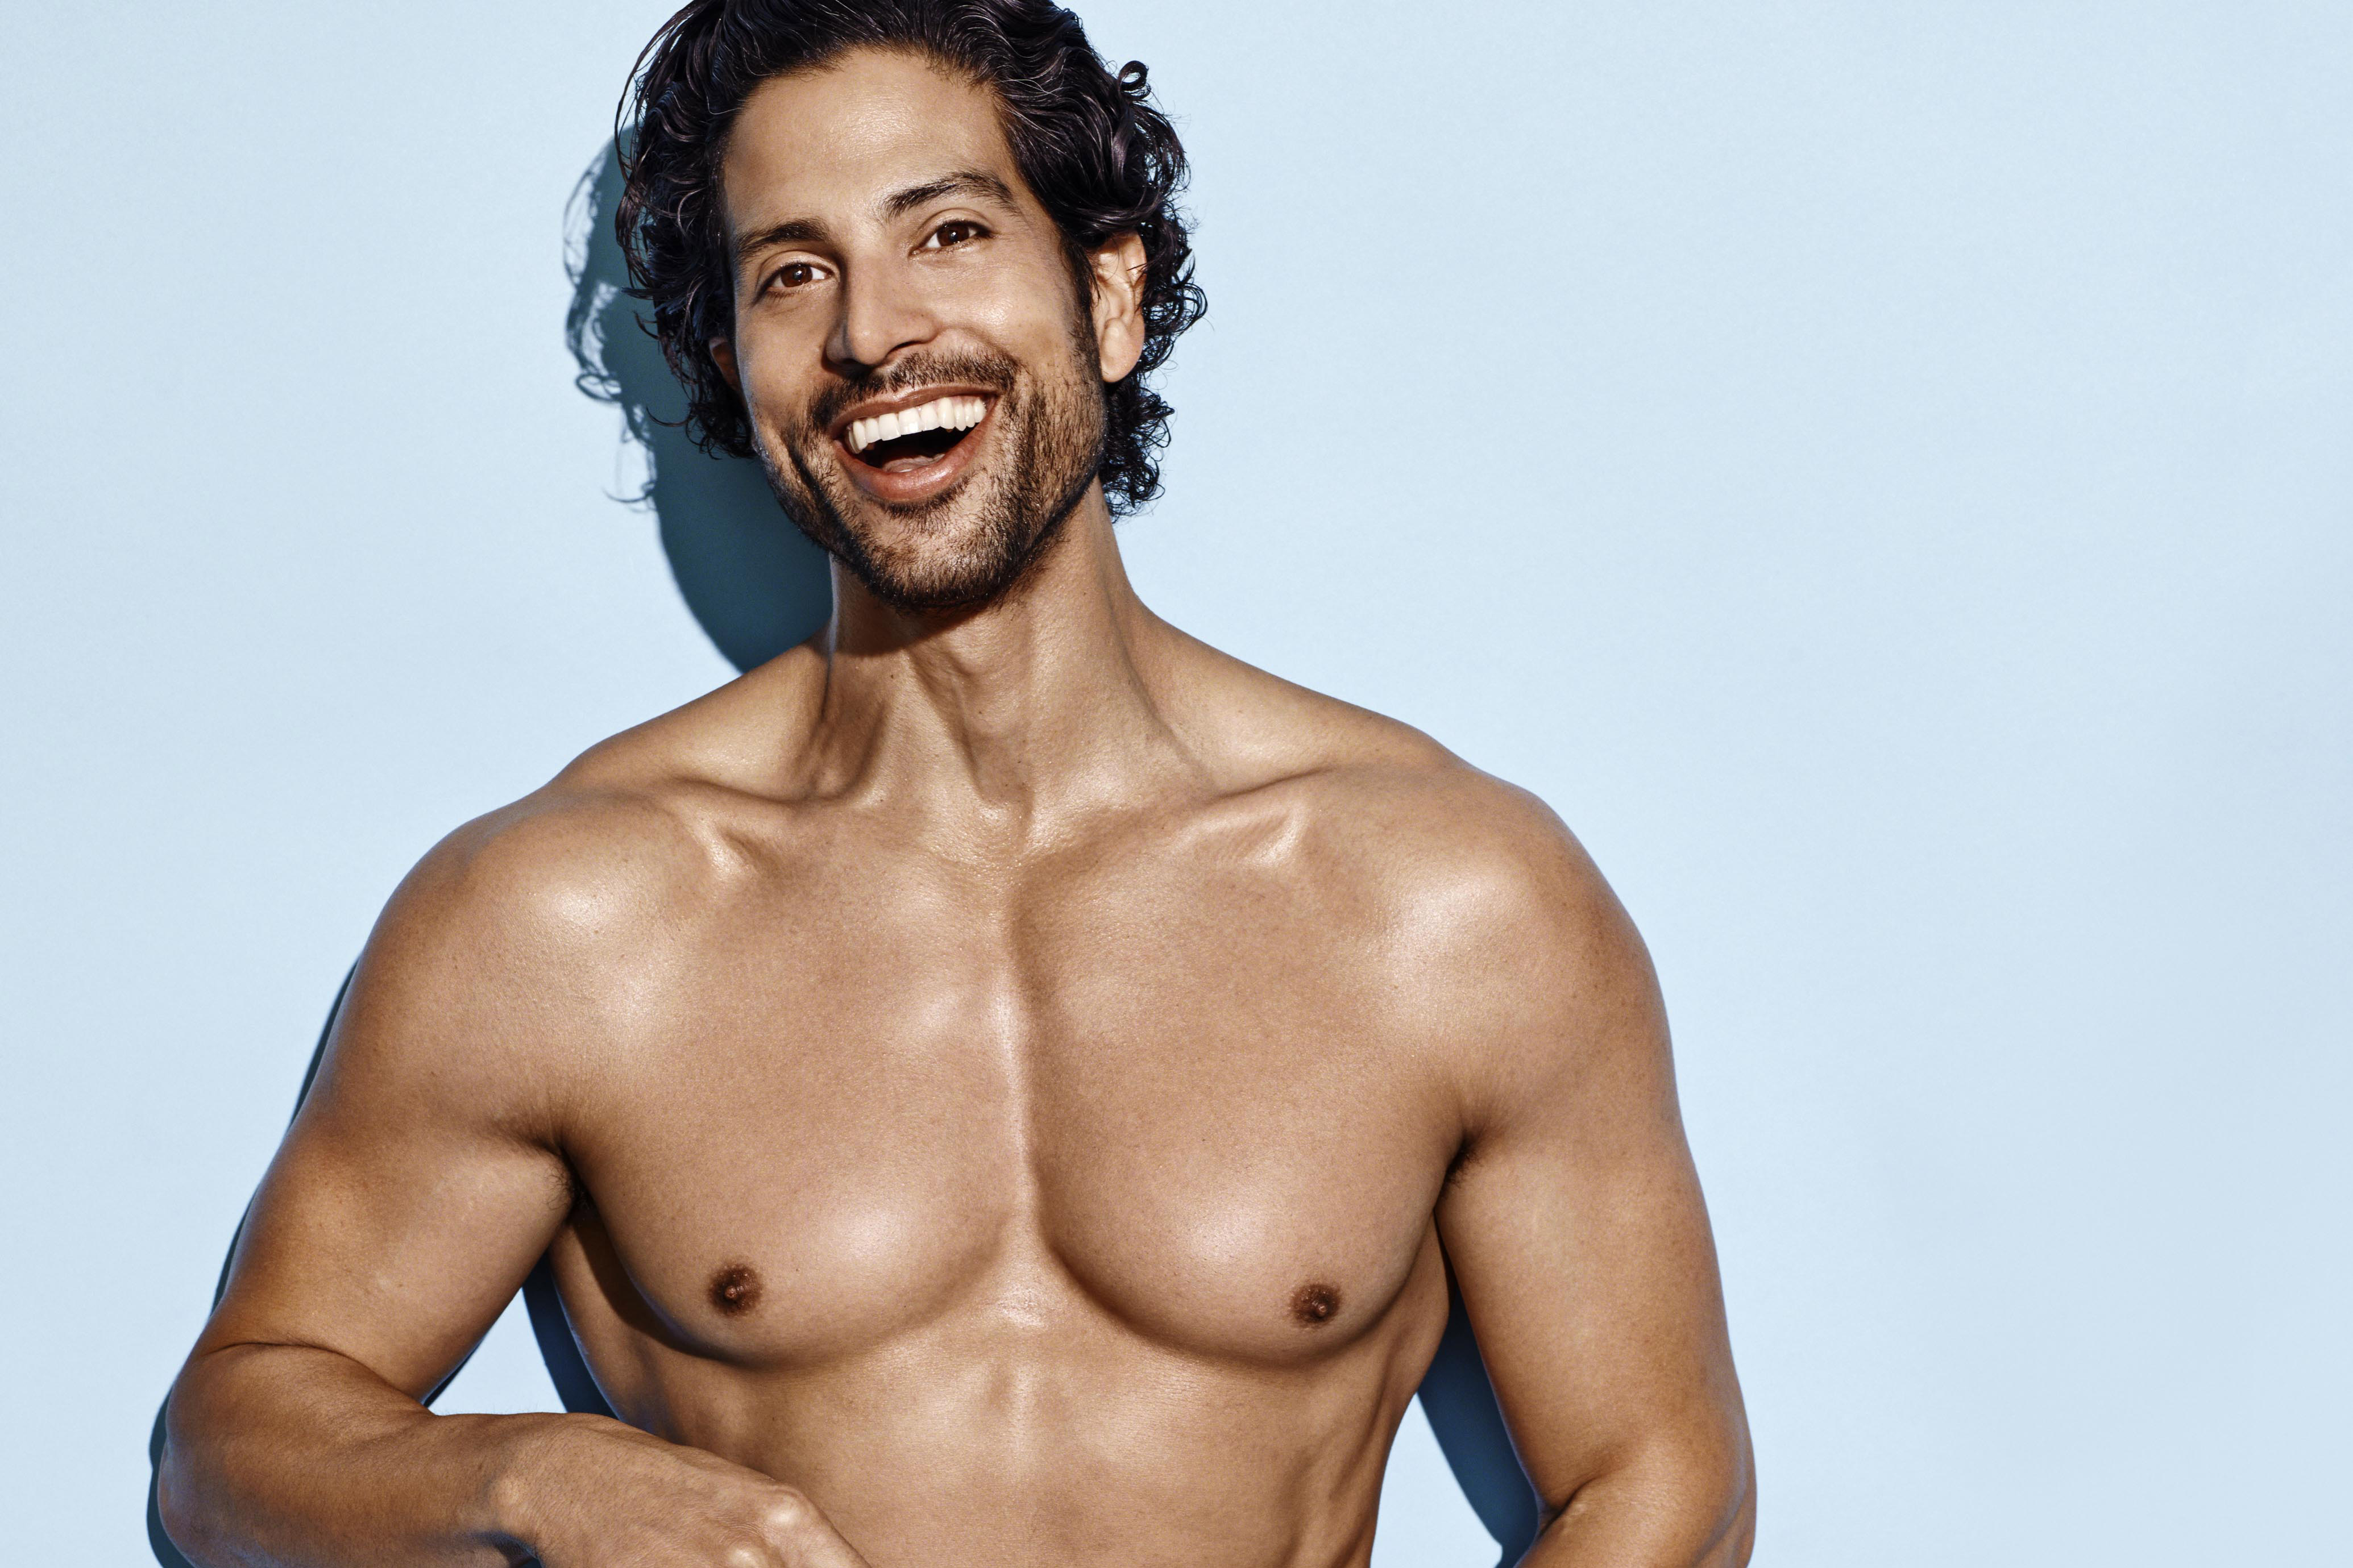 clare cutler recommends adam rodriguez naked pic